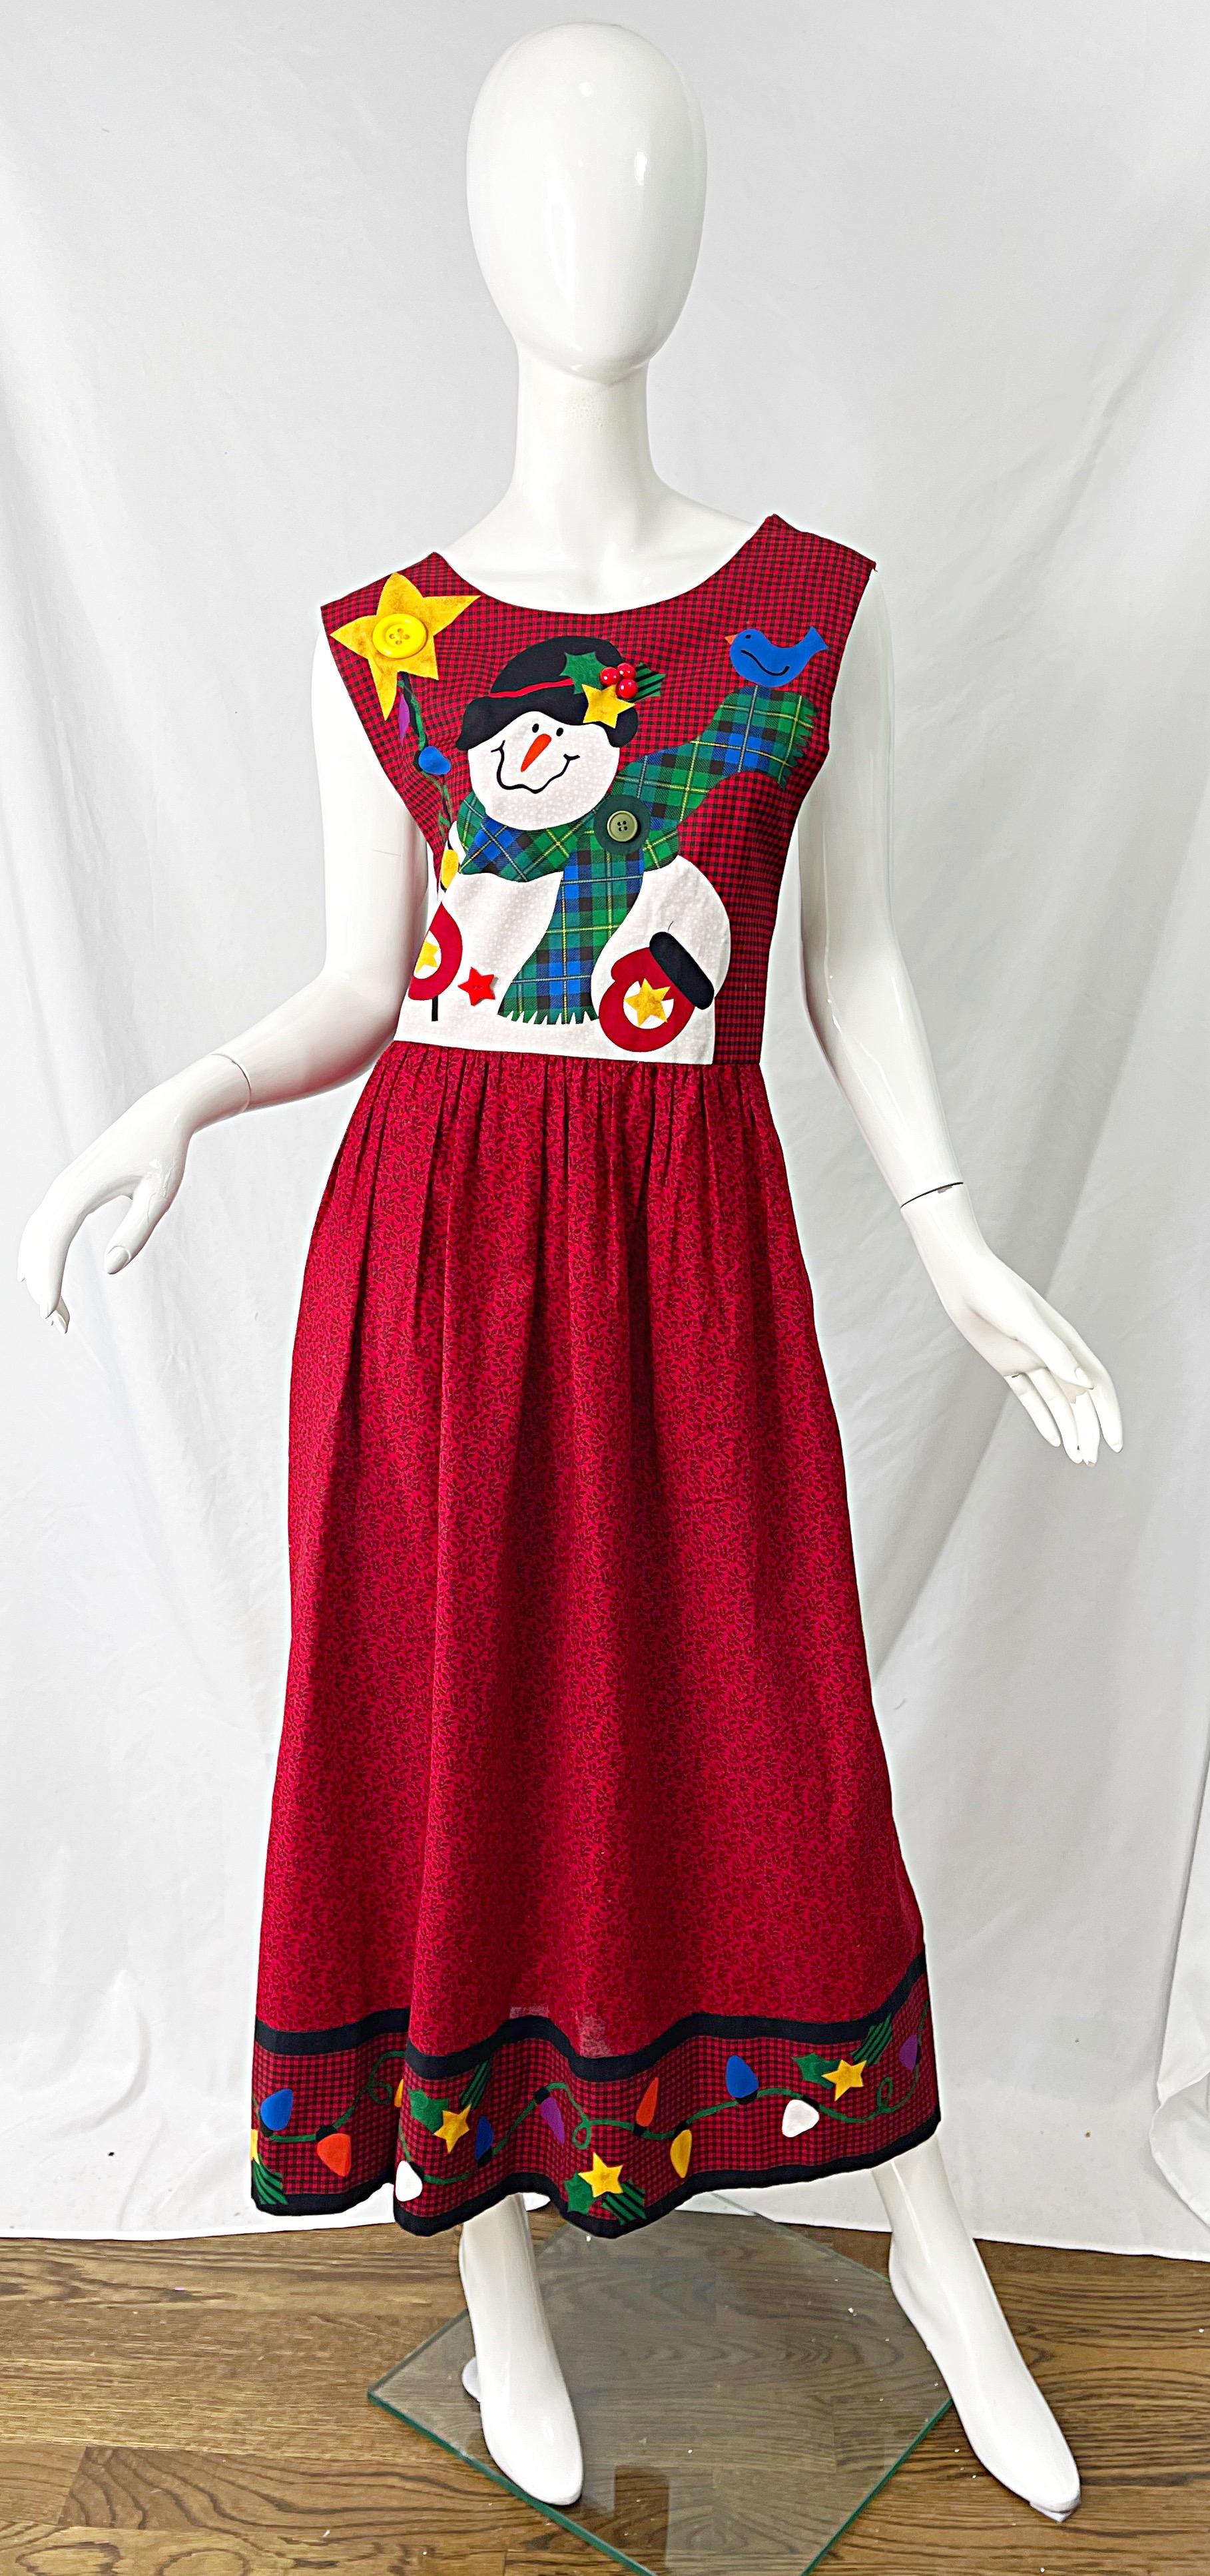 Fun 1990s cotton Frosty the Snowman novelty embroidered sleeveless Christmas jumper midi dress ! Features a red and green gingham bodice with paisley floral print skirt. Ties in the back can adjust waist size. Pair alone or over a sweater /